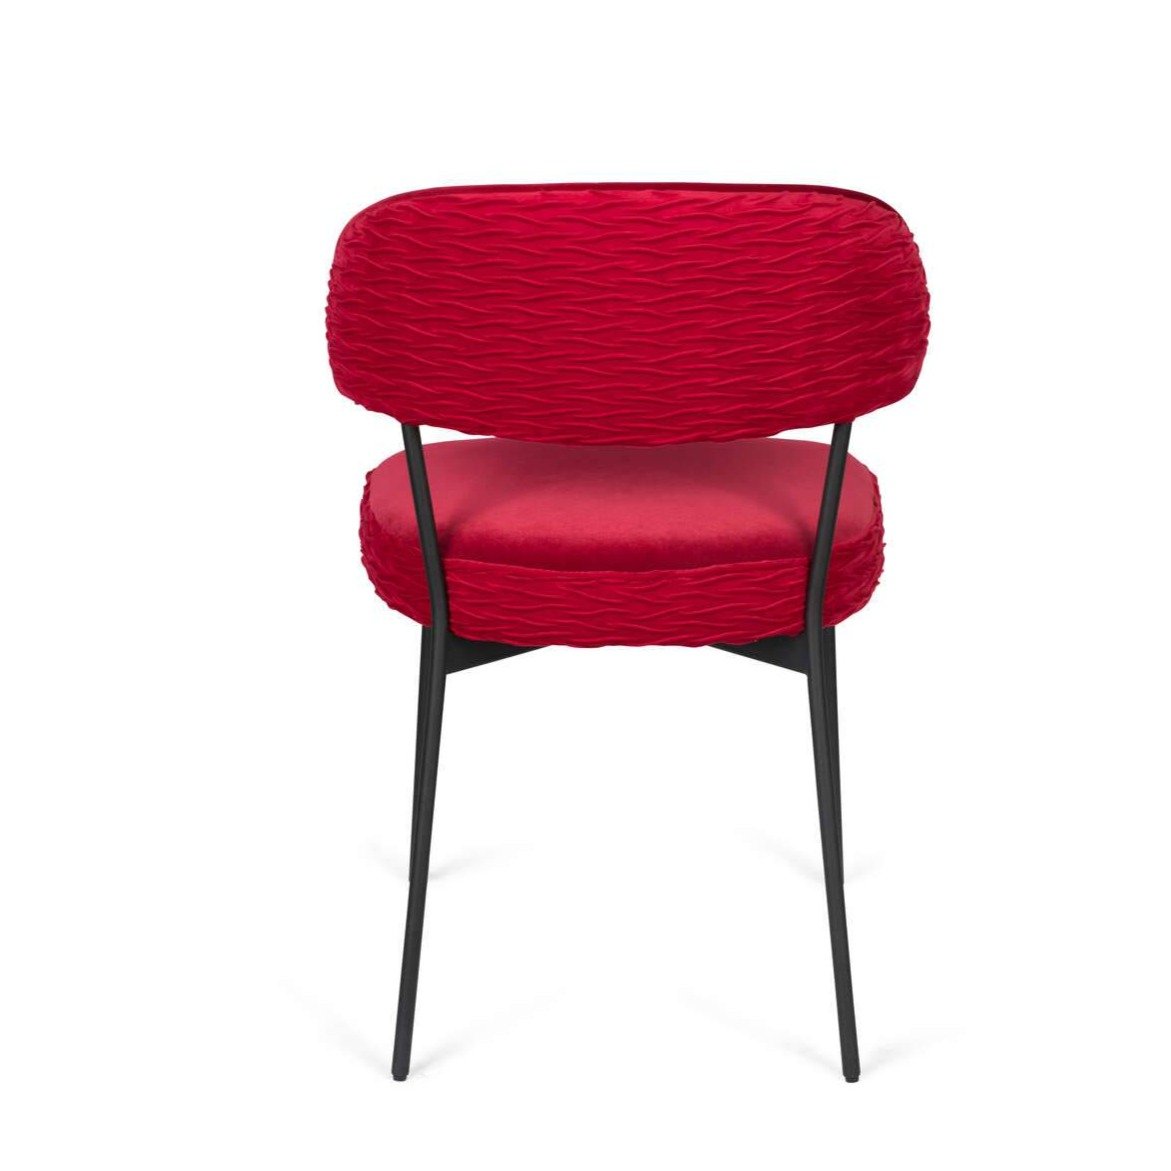 We present a dining room chair, which should not miss the dining room chairs: our Bold Monkey the Winner Takes It All chair. A simple, modernist design was made here in a clear range of shades: boldly choose from these stunning colors.